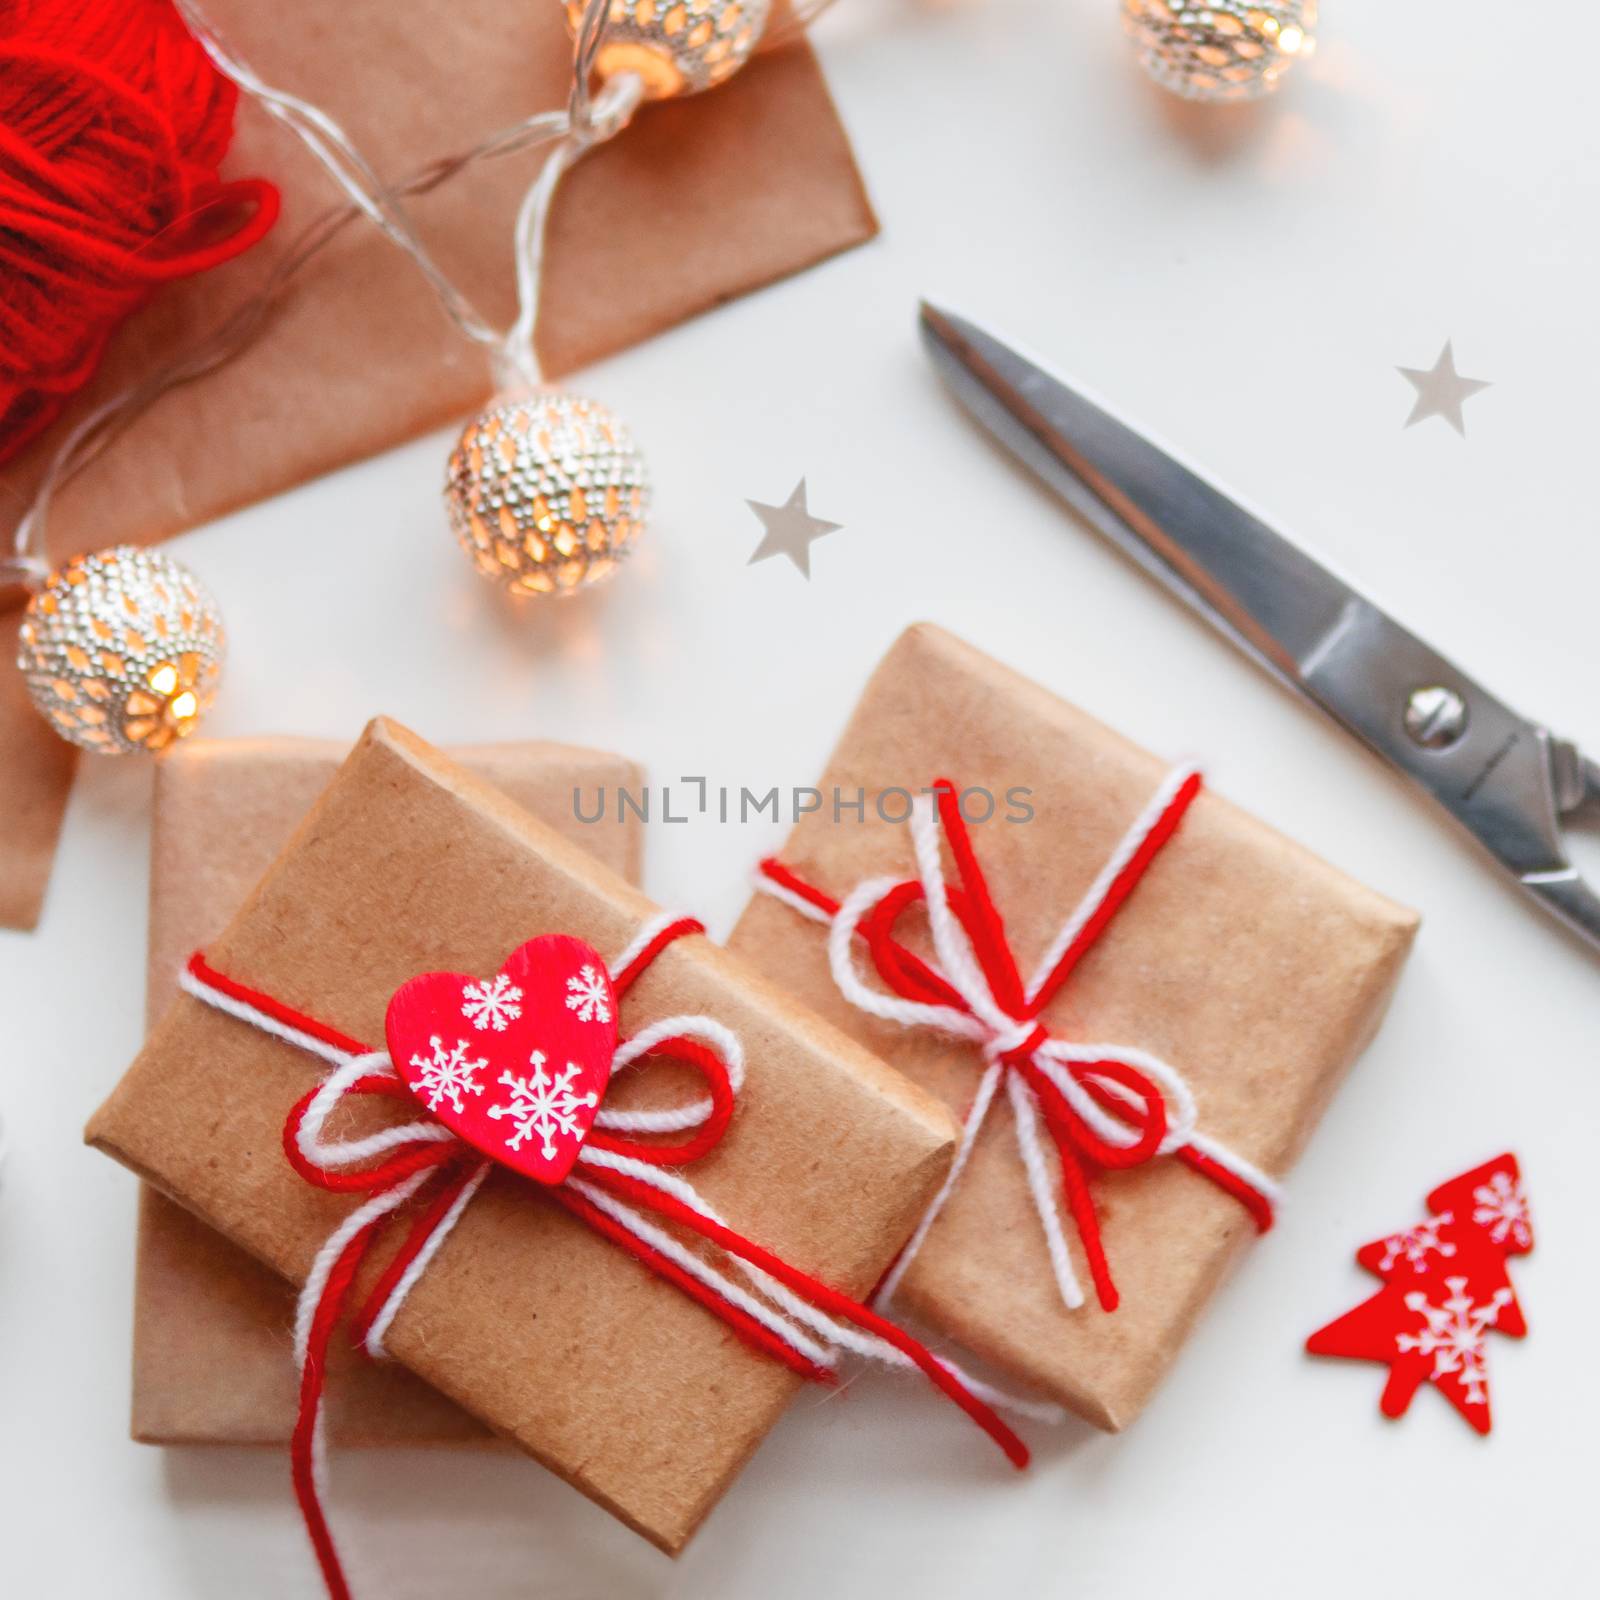 DIY presents wrapped in craft paper. Gifts tied with white and r by aksenovko